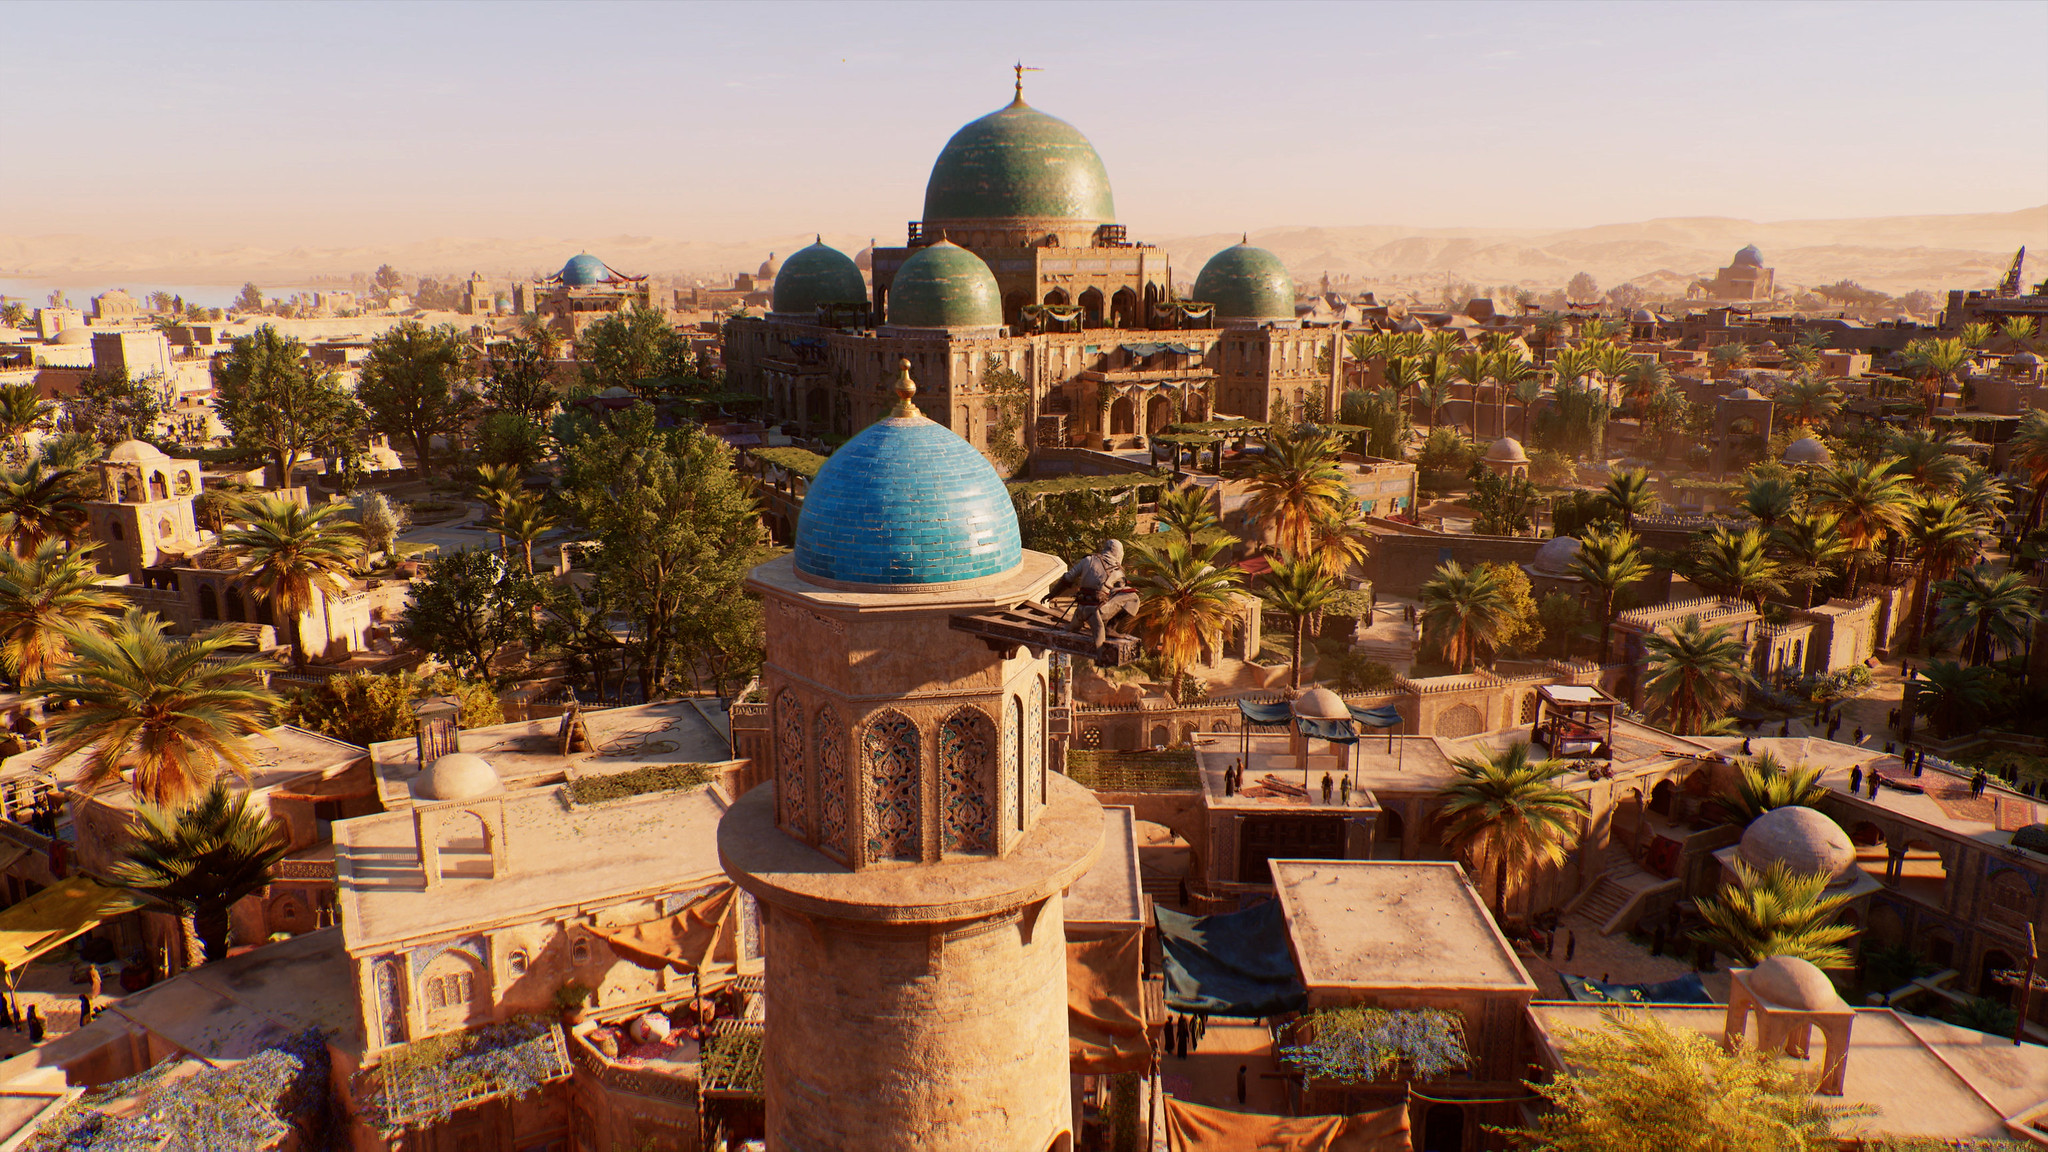 Assassin's Creed: Mirage - Official Gameplay Overview Trailer